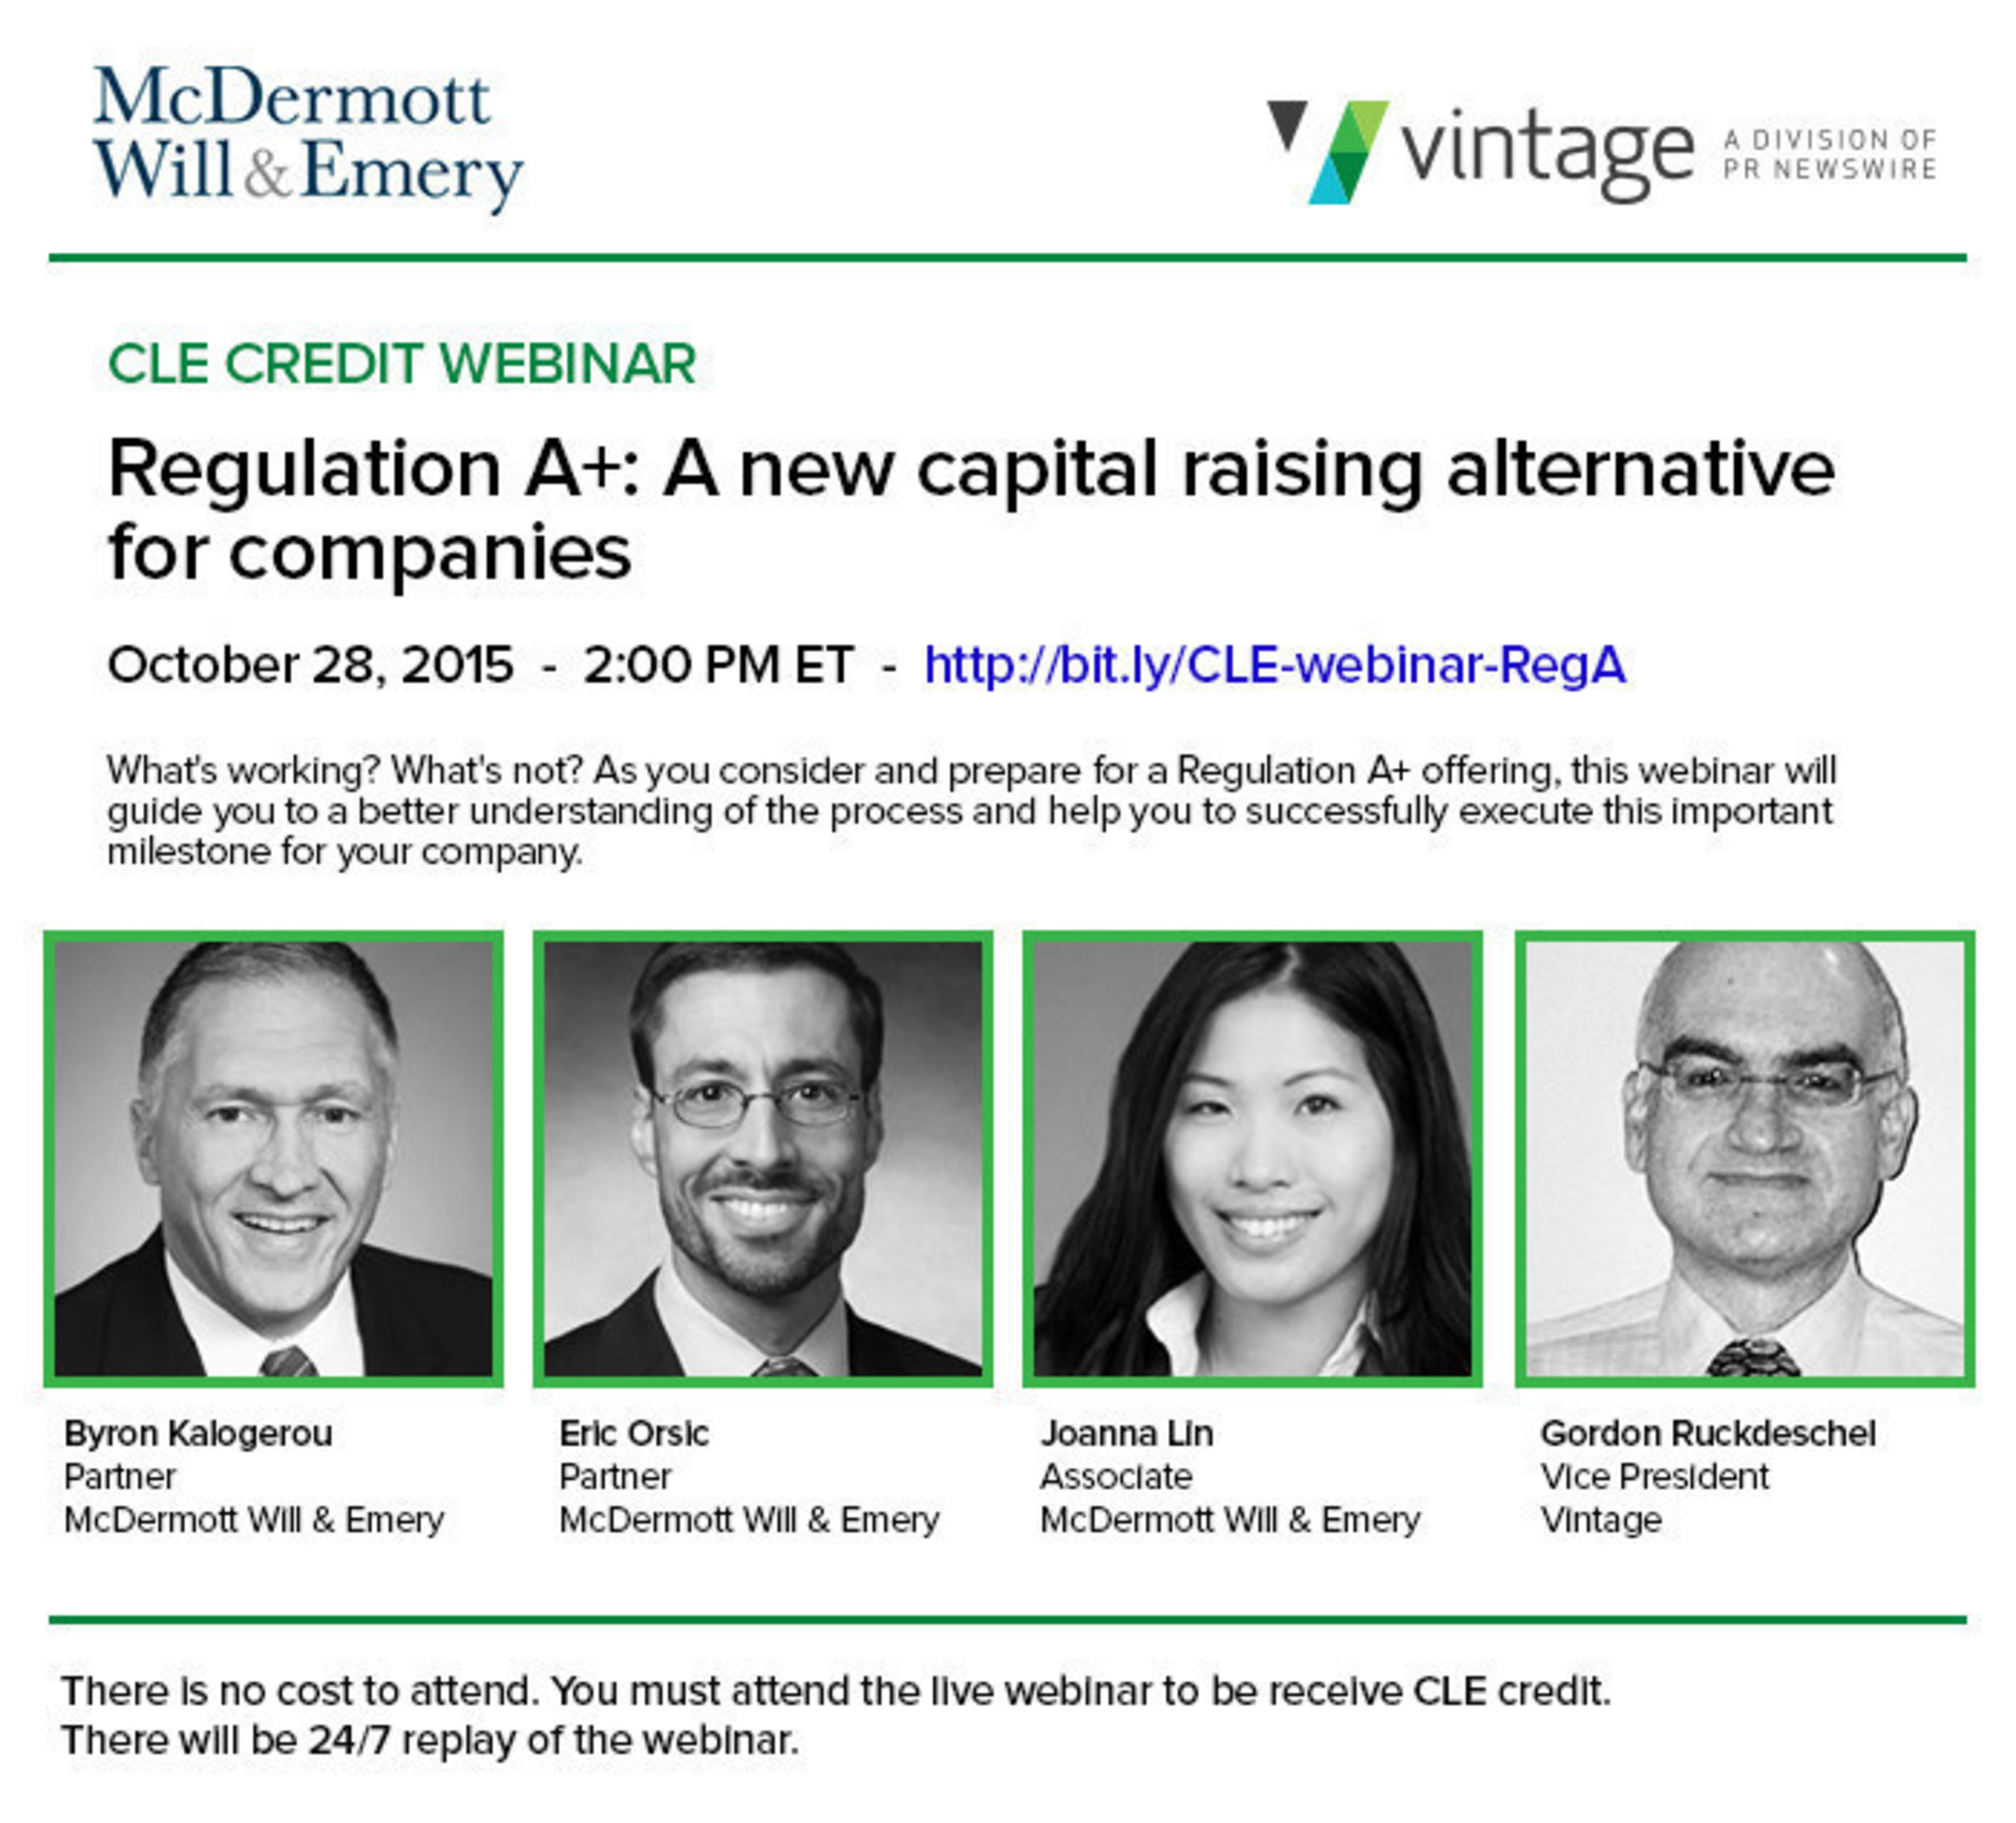 SEC Regulation A+ CLE Webinar Hosted by McDermott Will & Emery and Vintage: October 28Free webinar to discuss a four-month review of the Reg A+ and tips for a successful "mini-IPO" filing